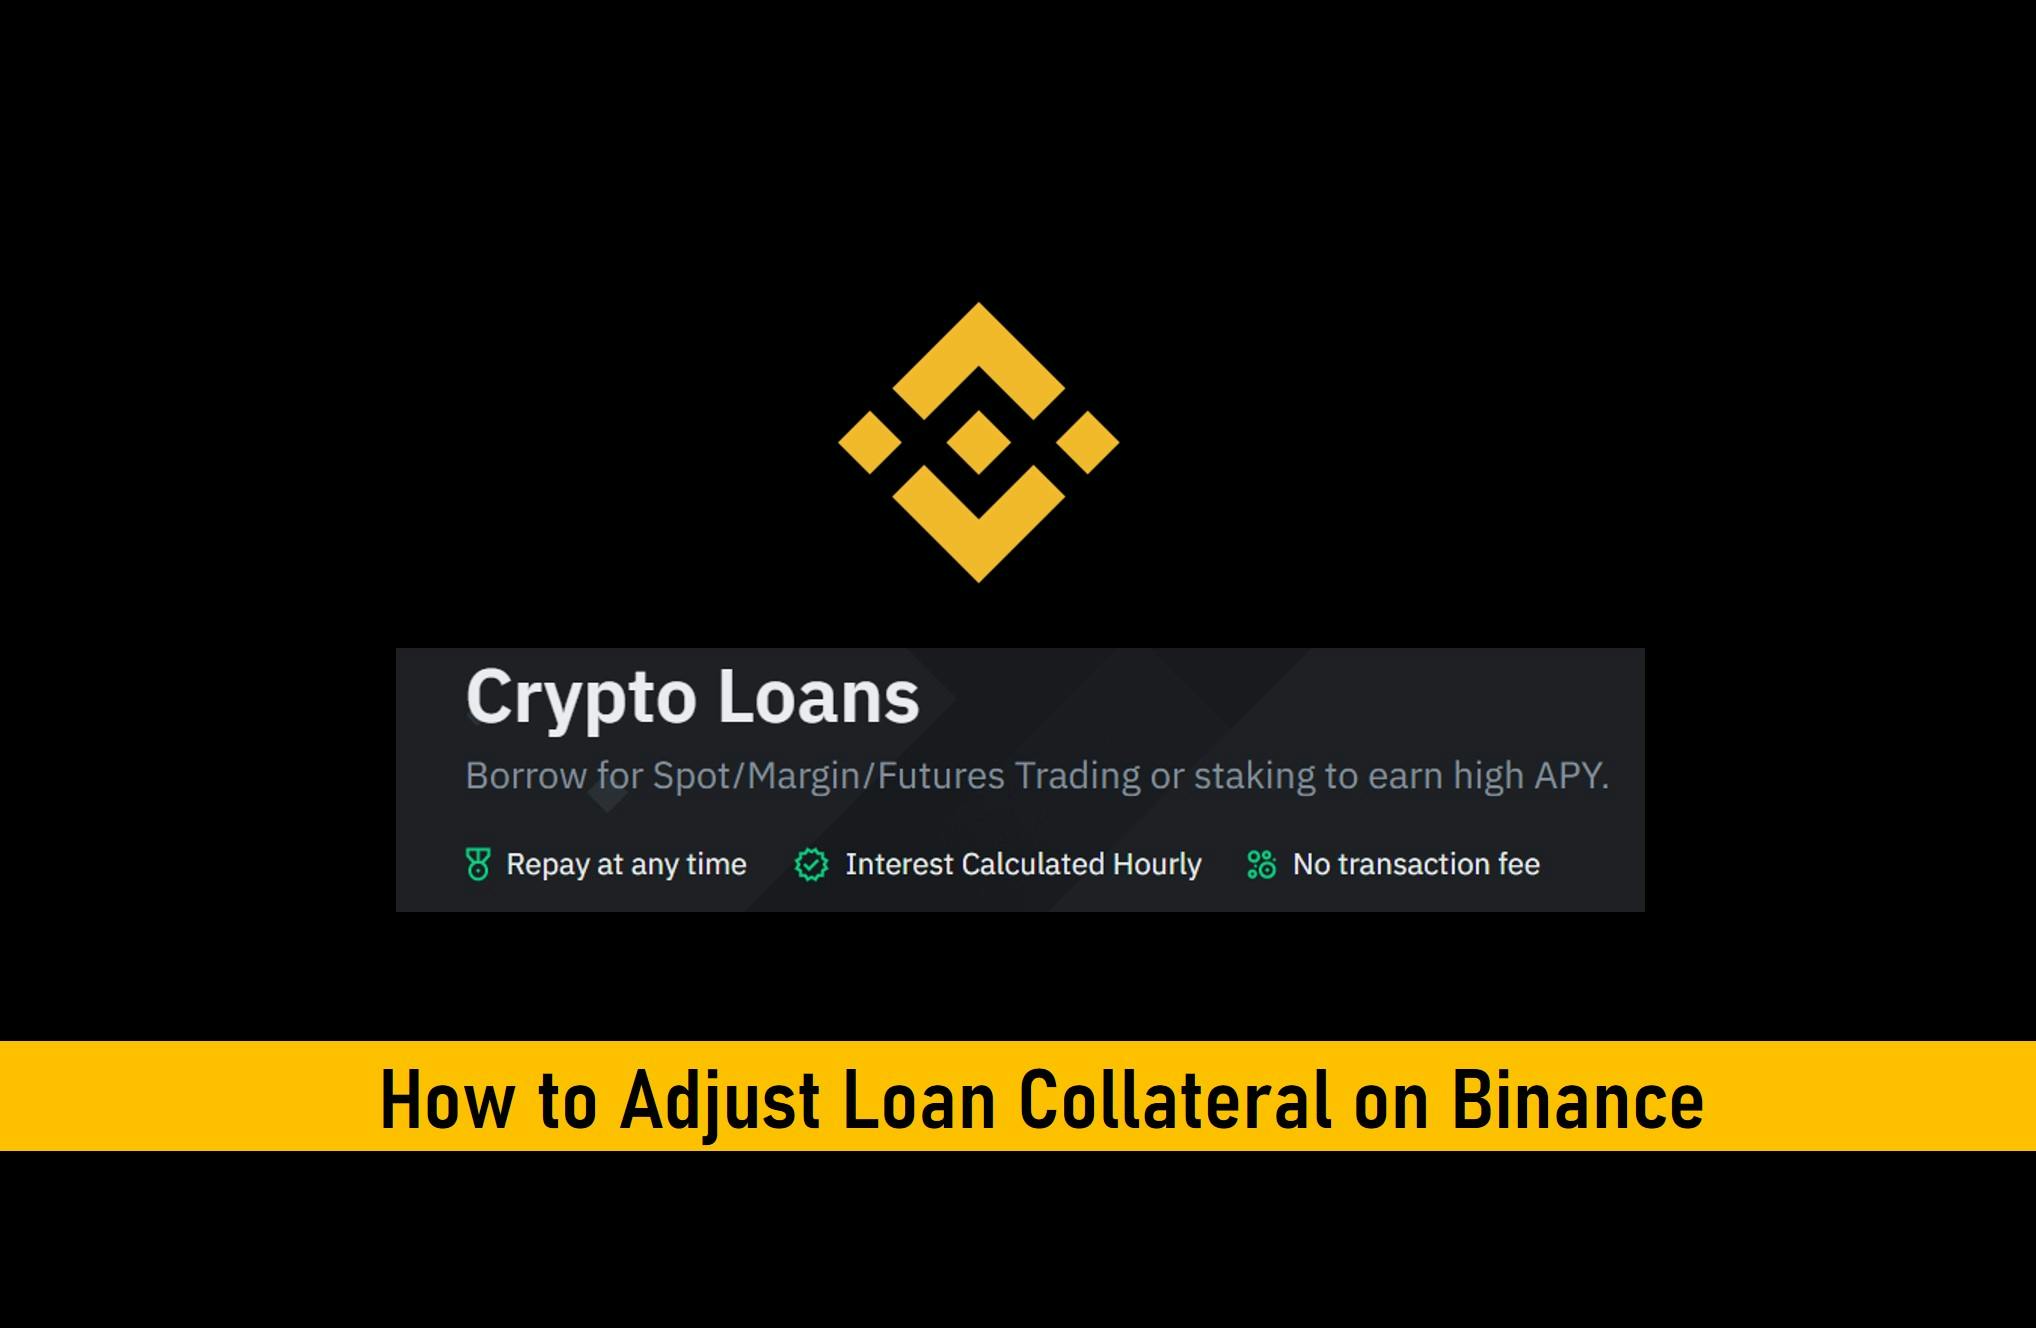 How to Adjust Loan Collateral on Binance